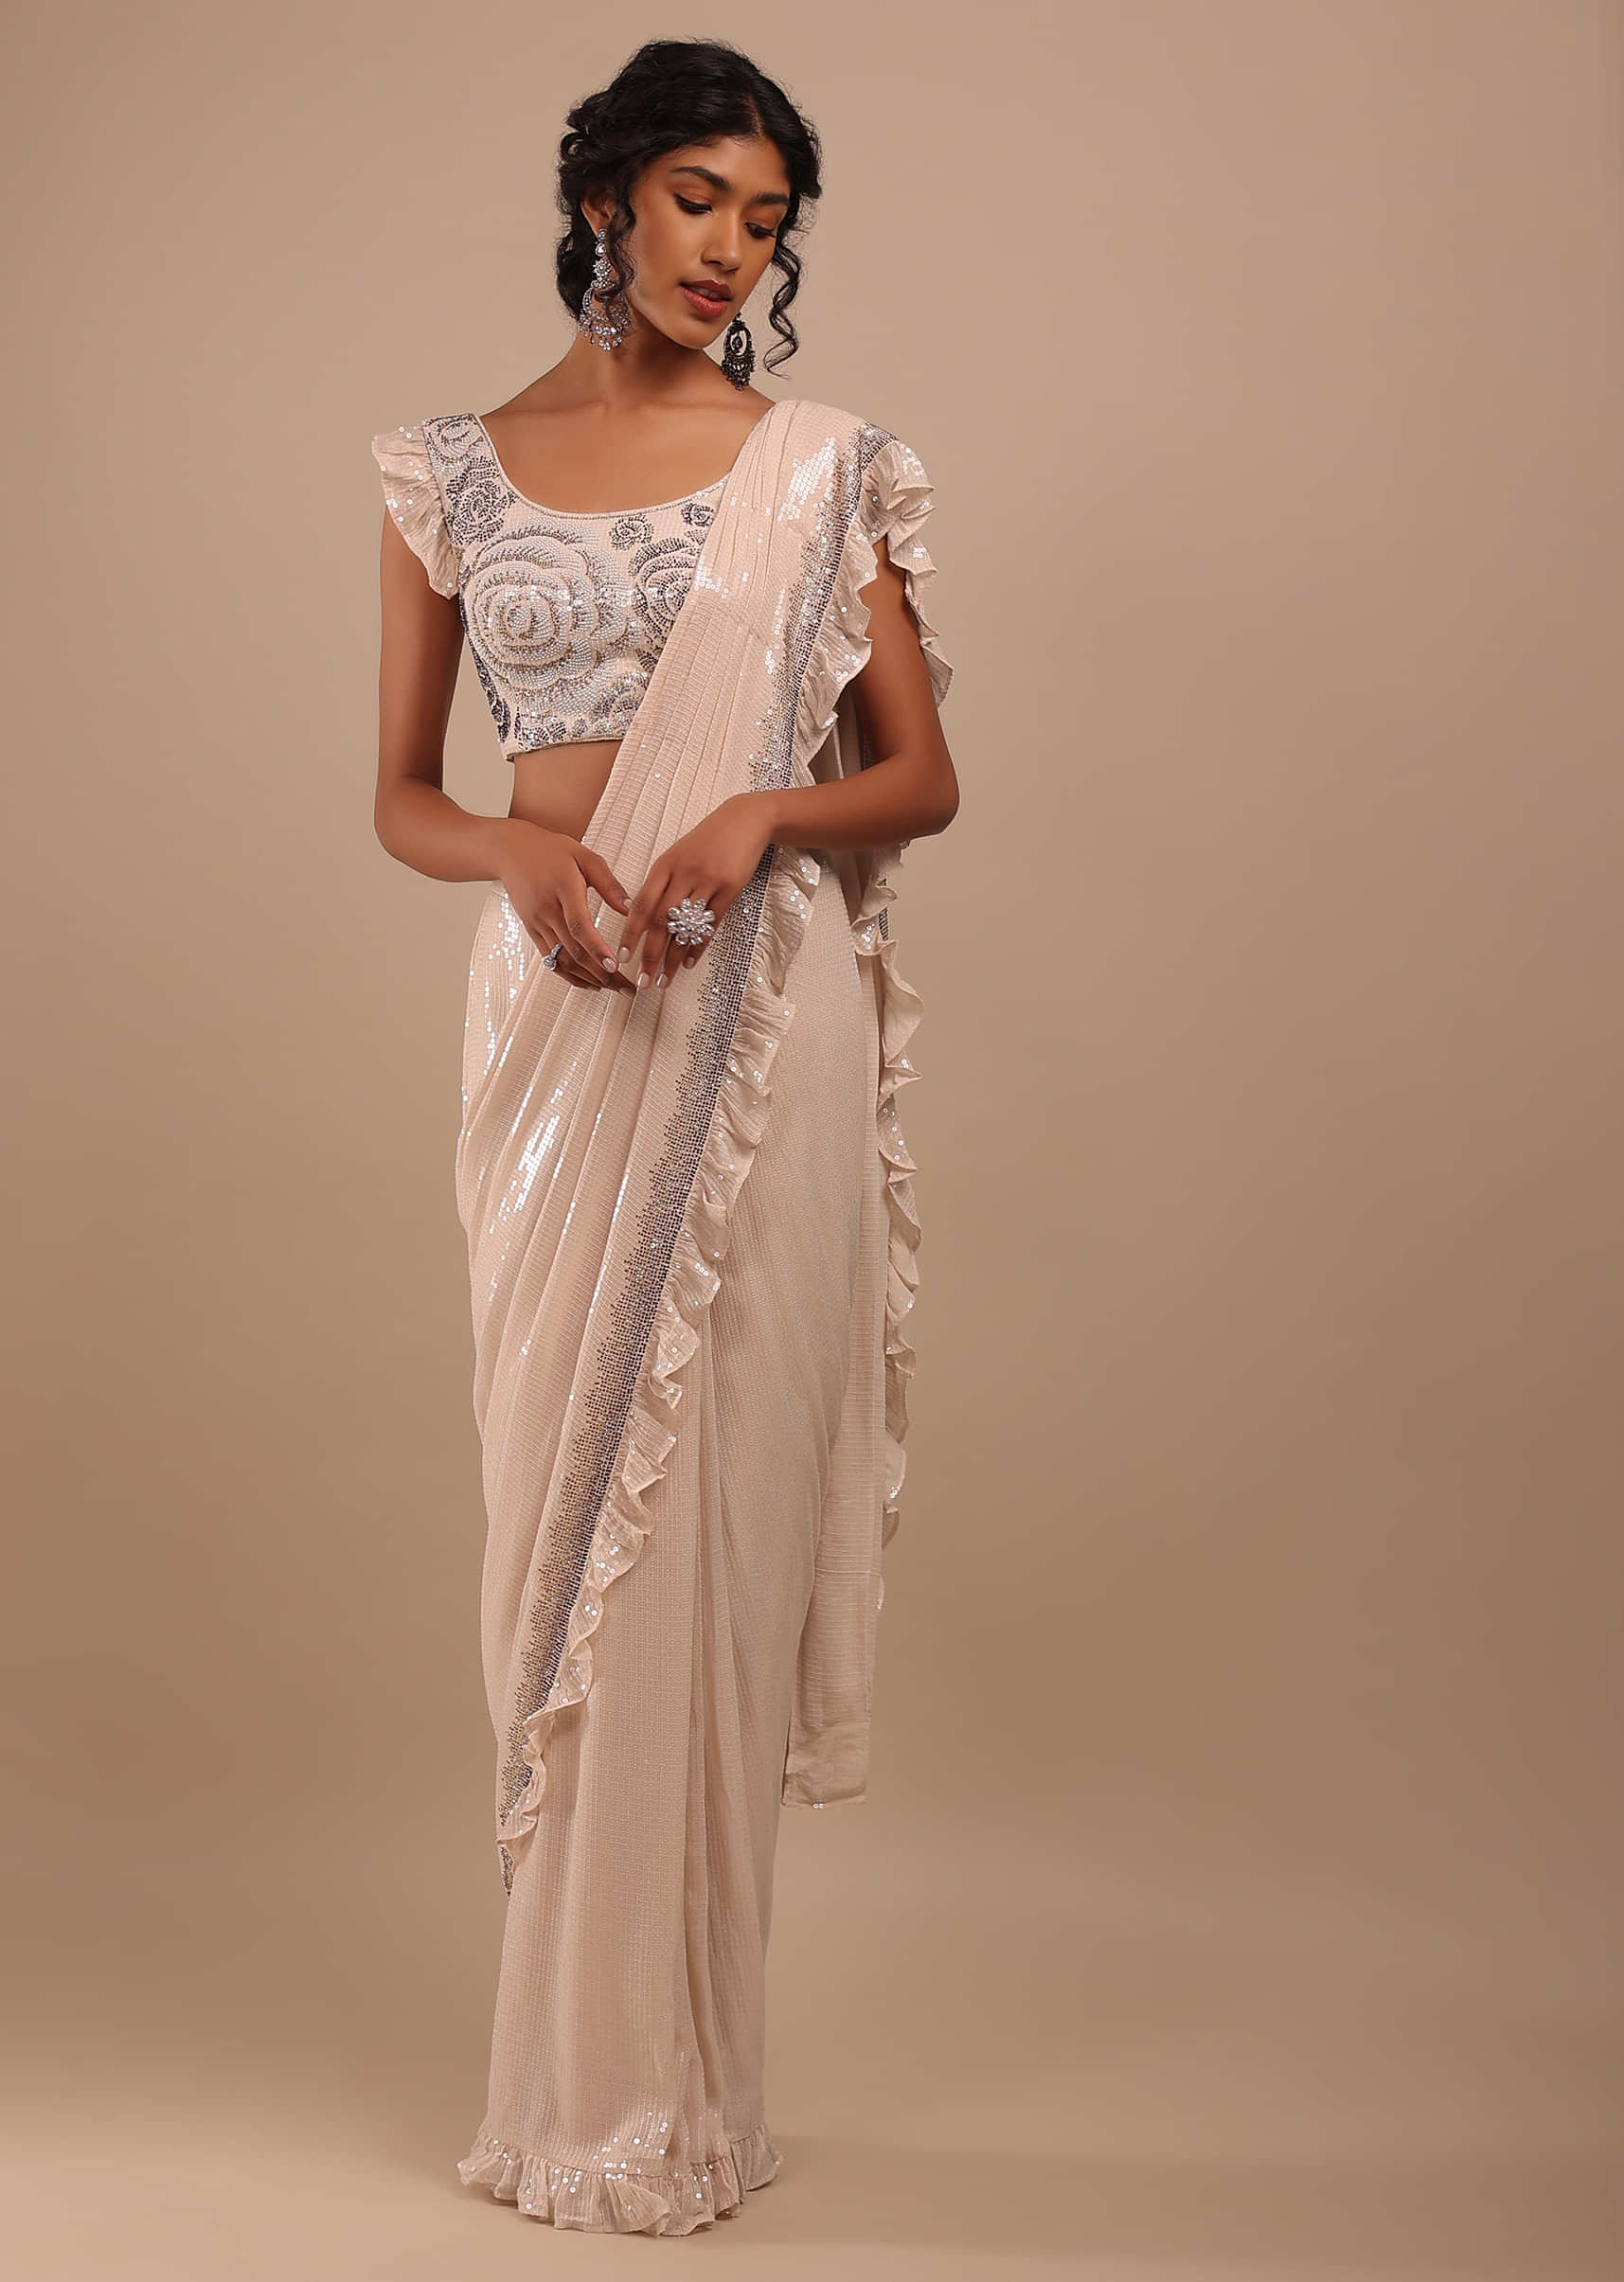 Pearl Pink Sequins Saree With Frills On The Border, Crafted In Georgette In Multi-Color Beads Embroidery